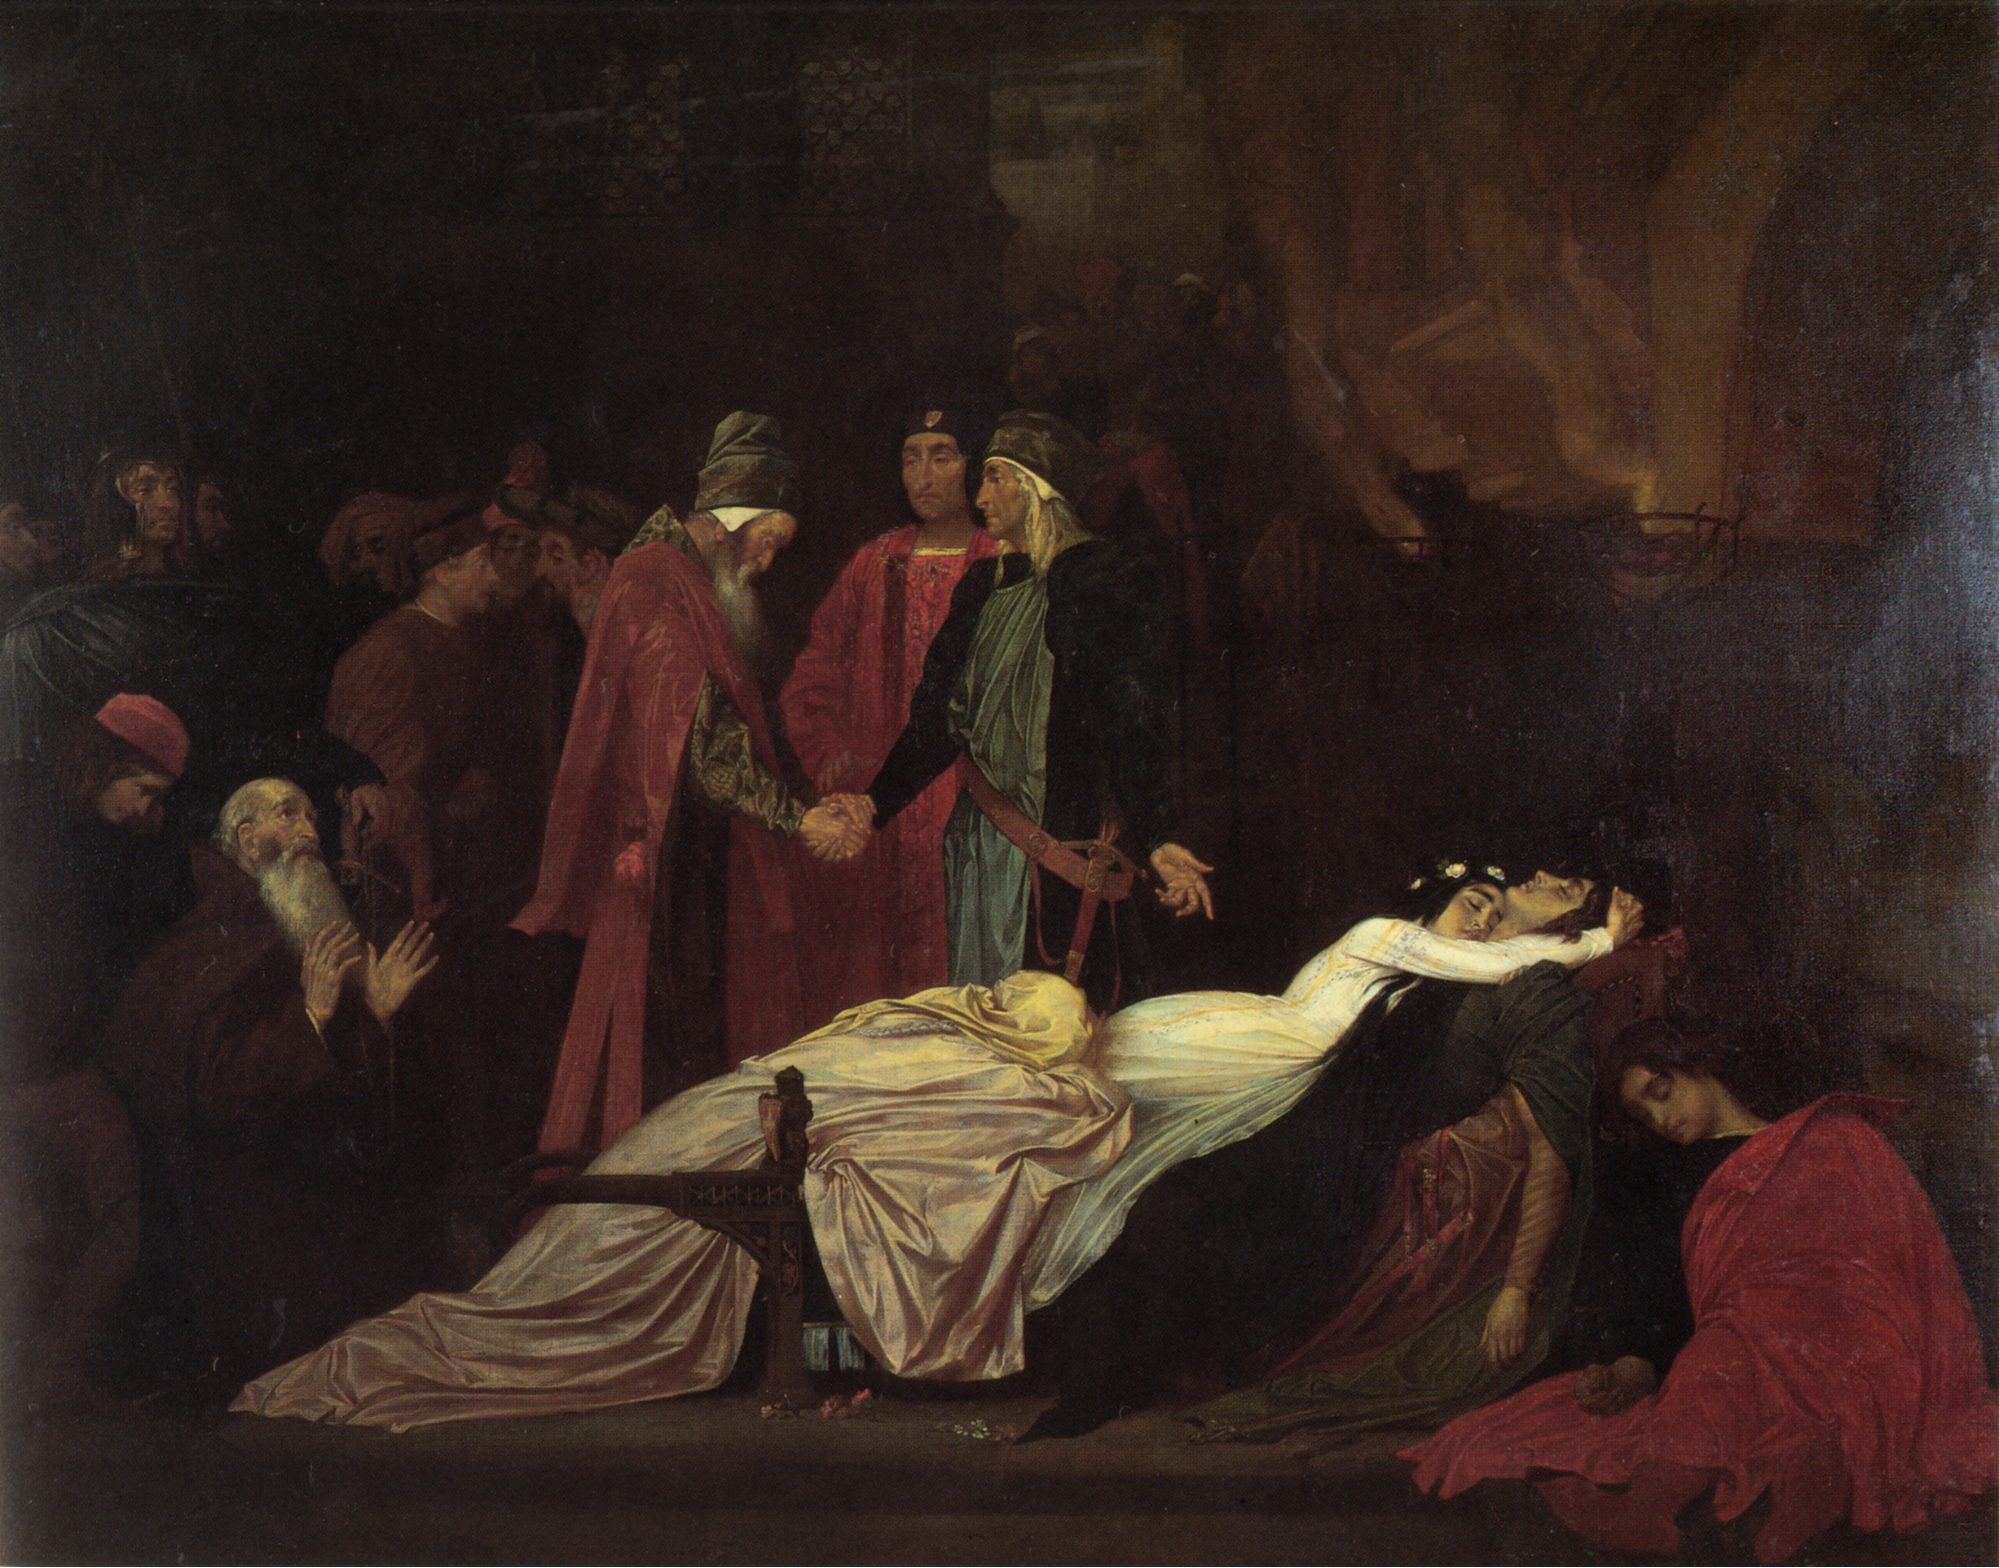 The Reconciliation of the Montagues and Capulets over the Dead Bodies of Romeo and Juliet by Frederick Leighton